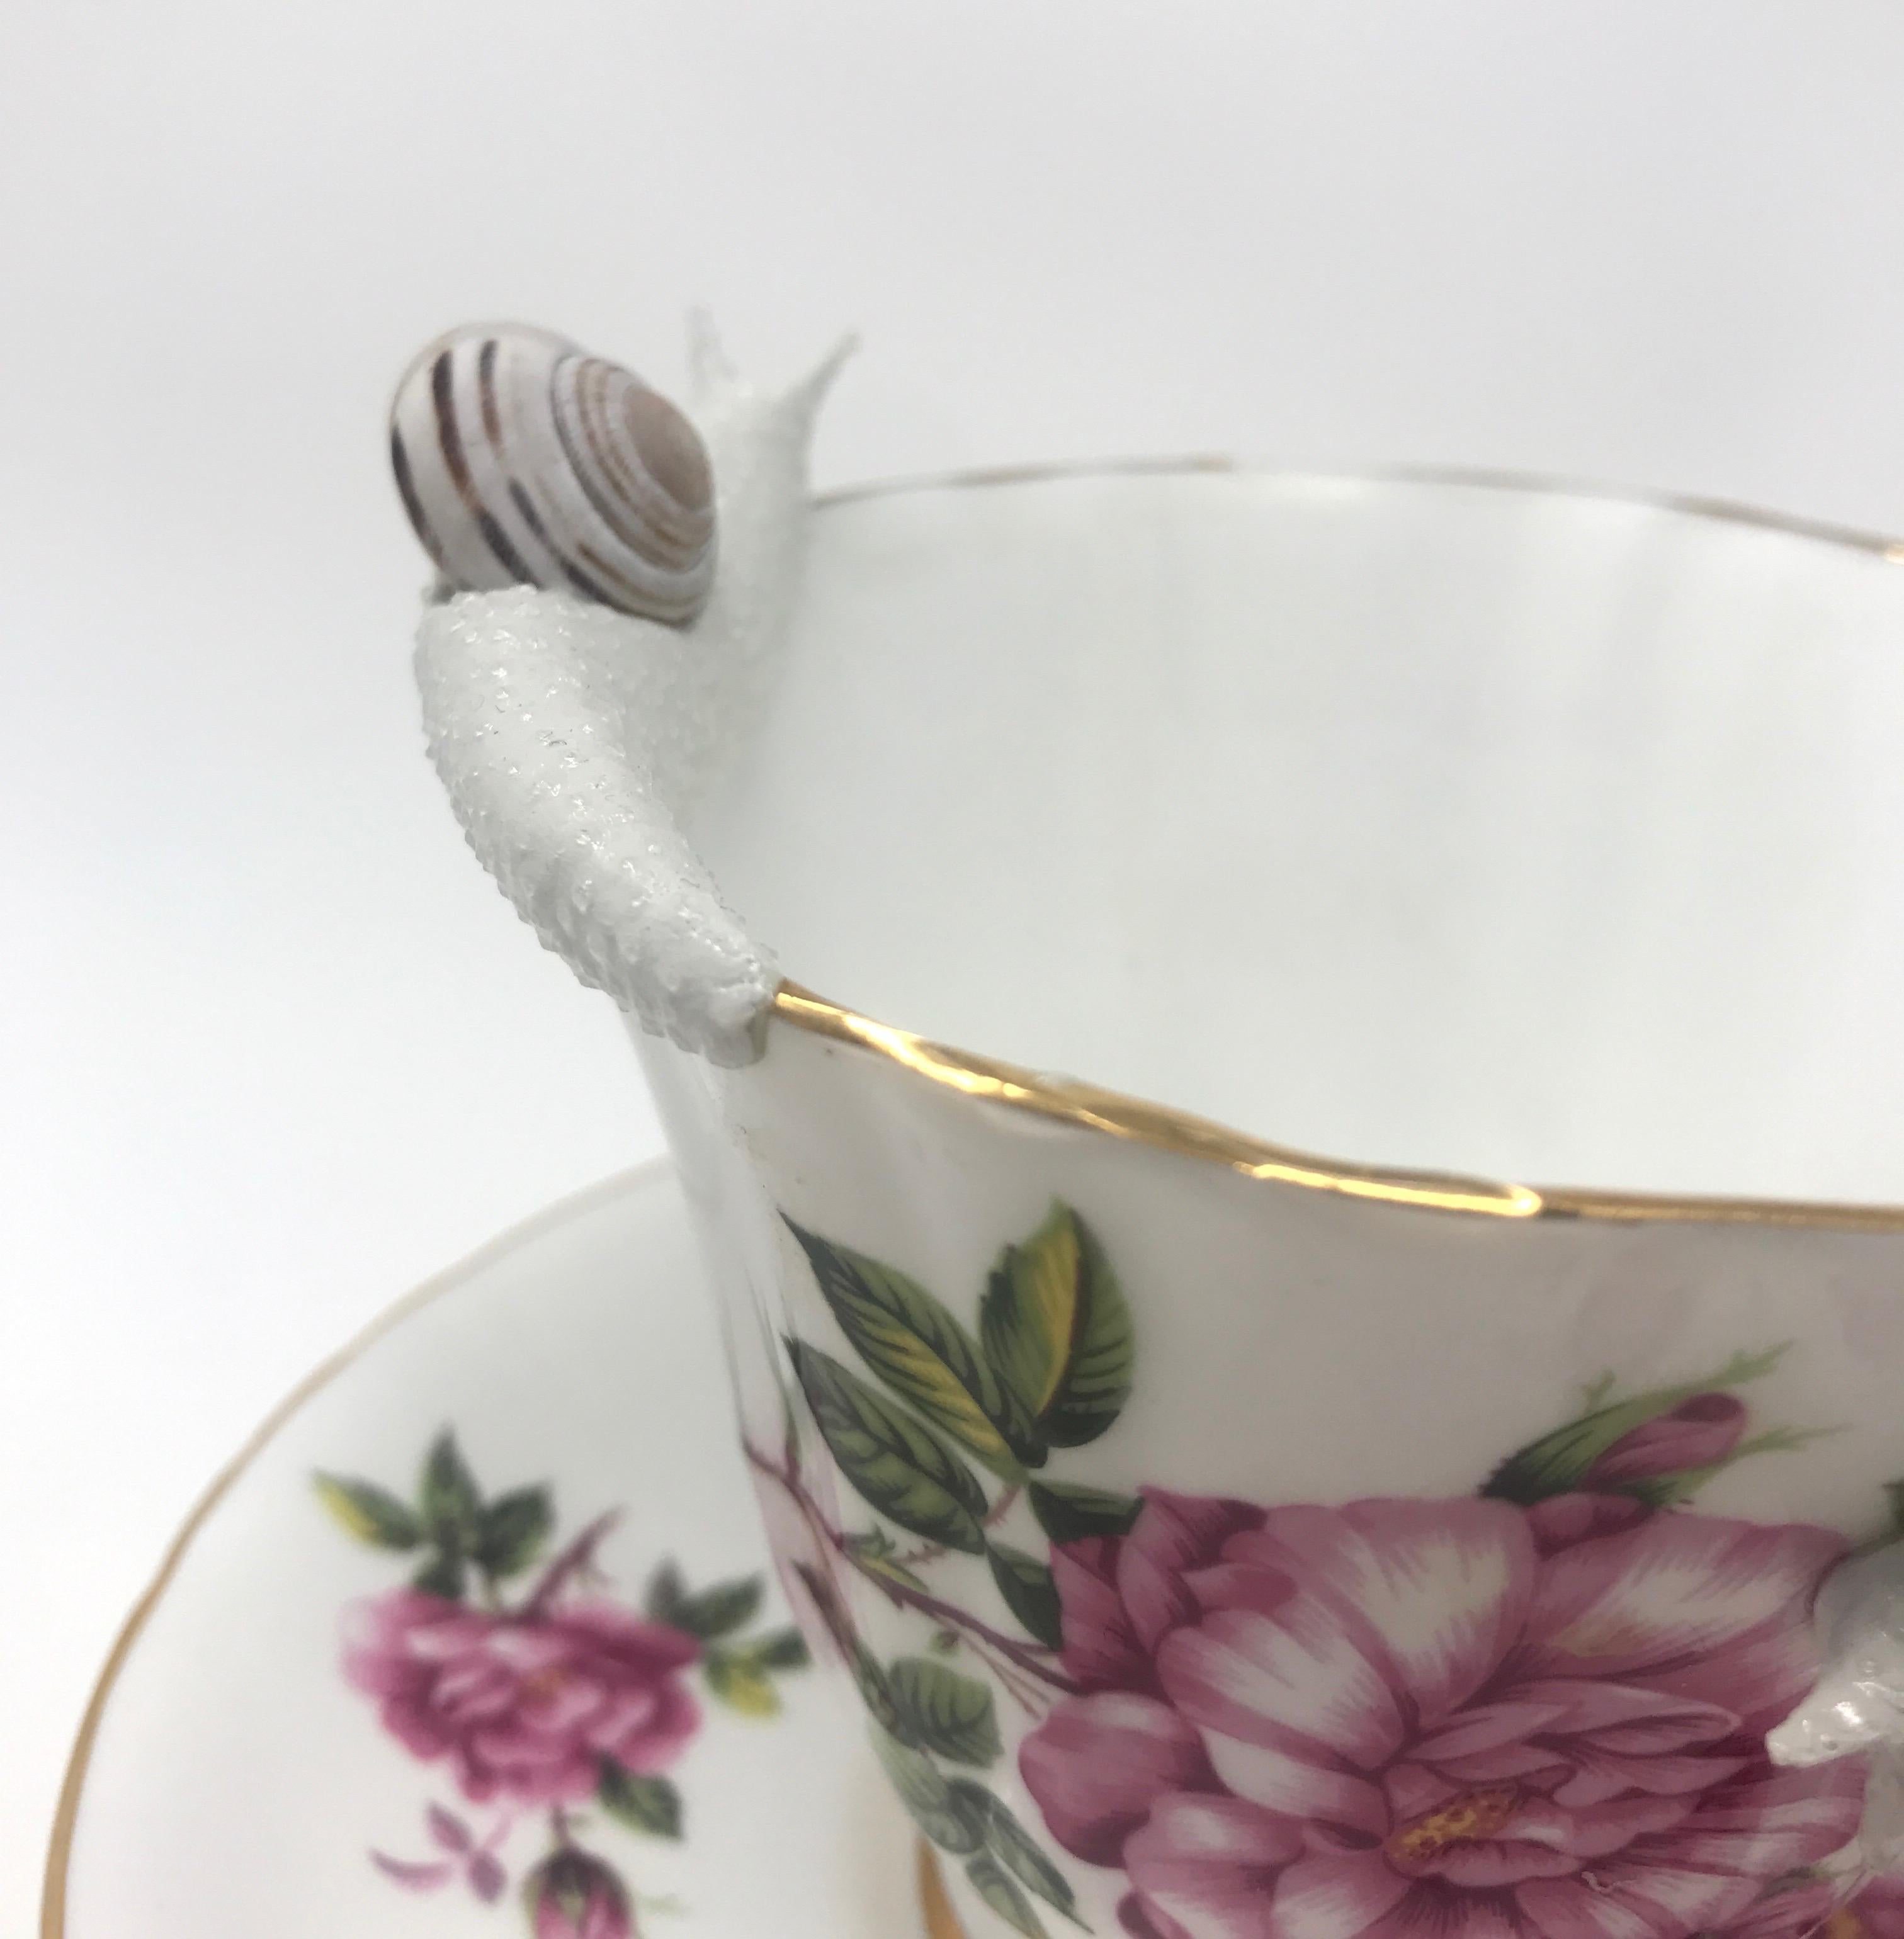 This piece was created with real found snail shells and a durable epoxy clay.  Hand formed by New York artist, Bethany Krull,  the undulating snails circle the delicate rim of this floral teacup.  The glistening wet creatures are surfaced with many